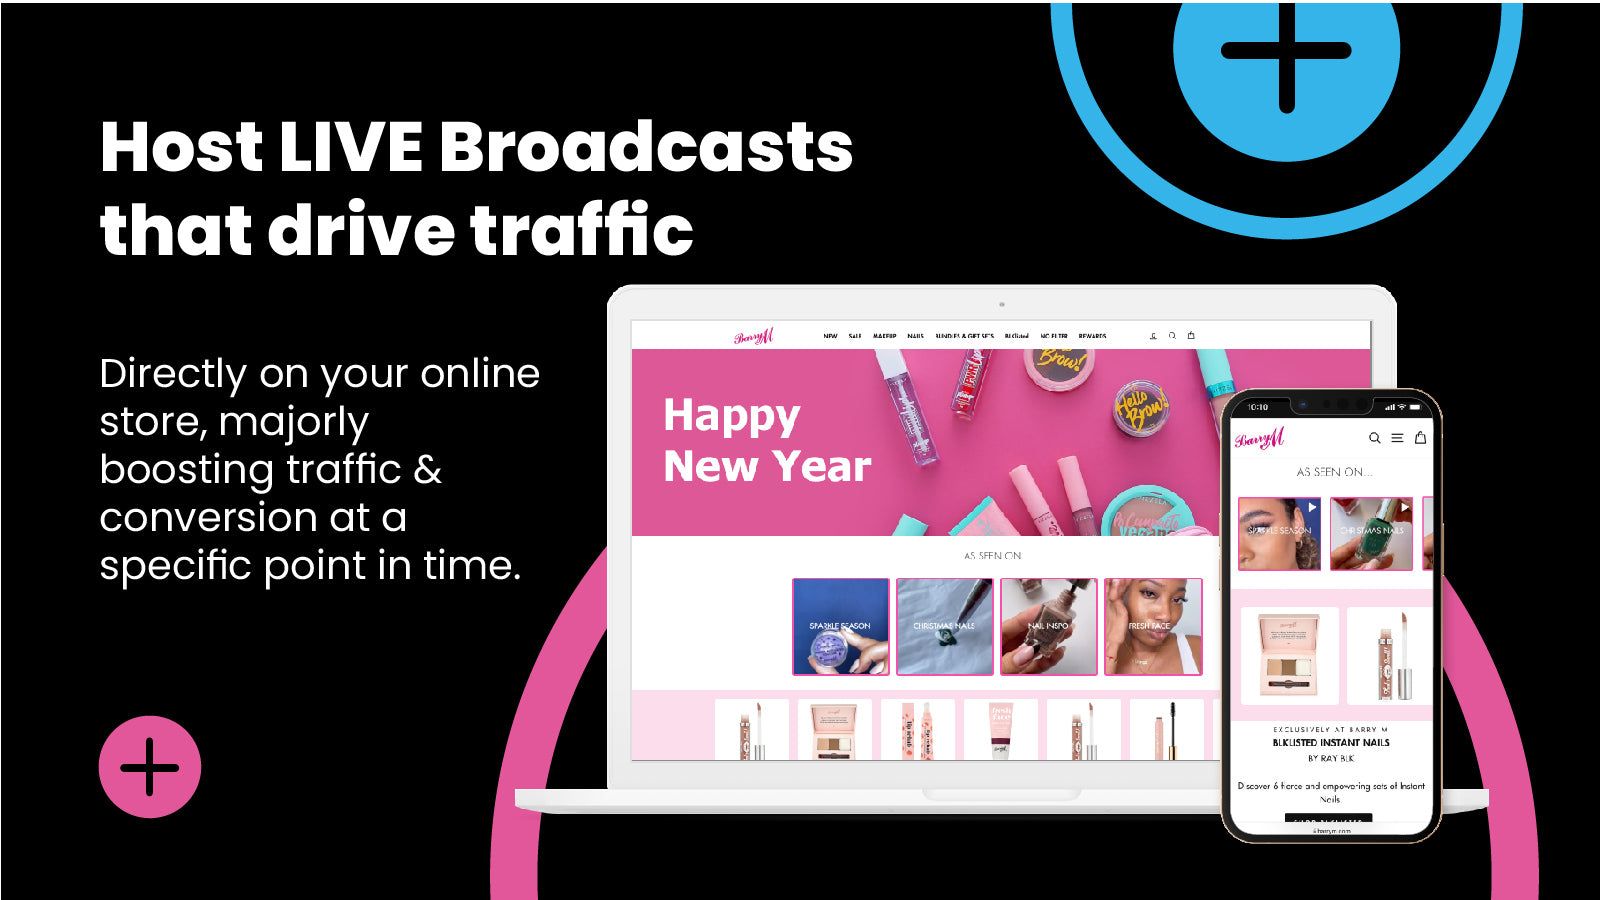 Host LIVEcasts that are a powerful means to increase traffic